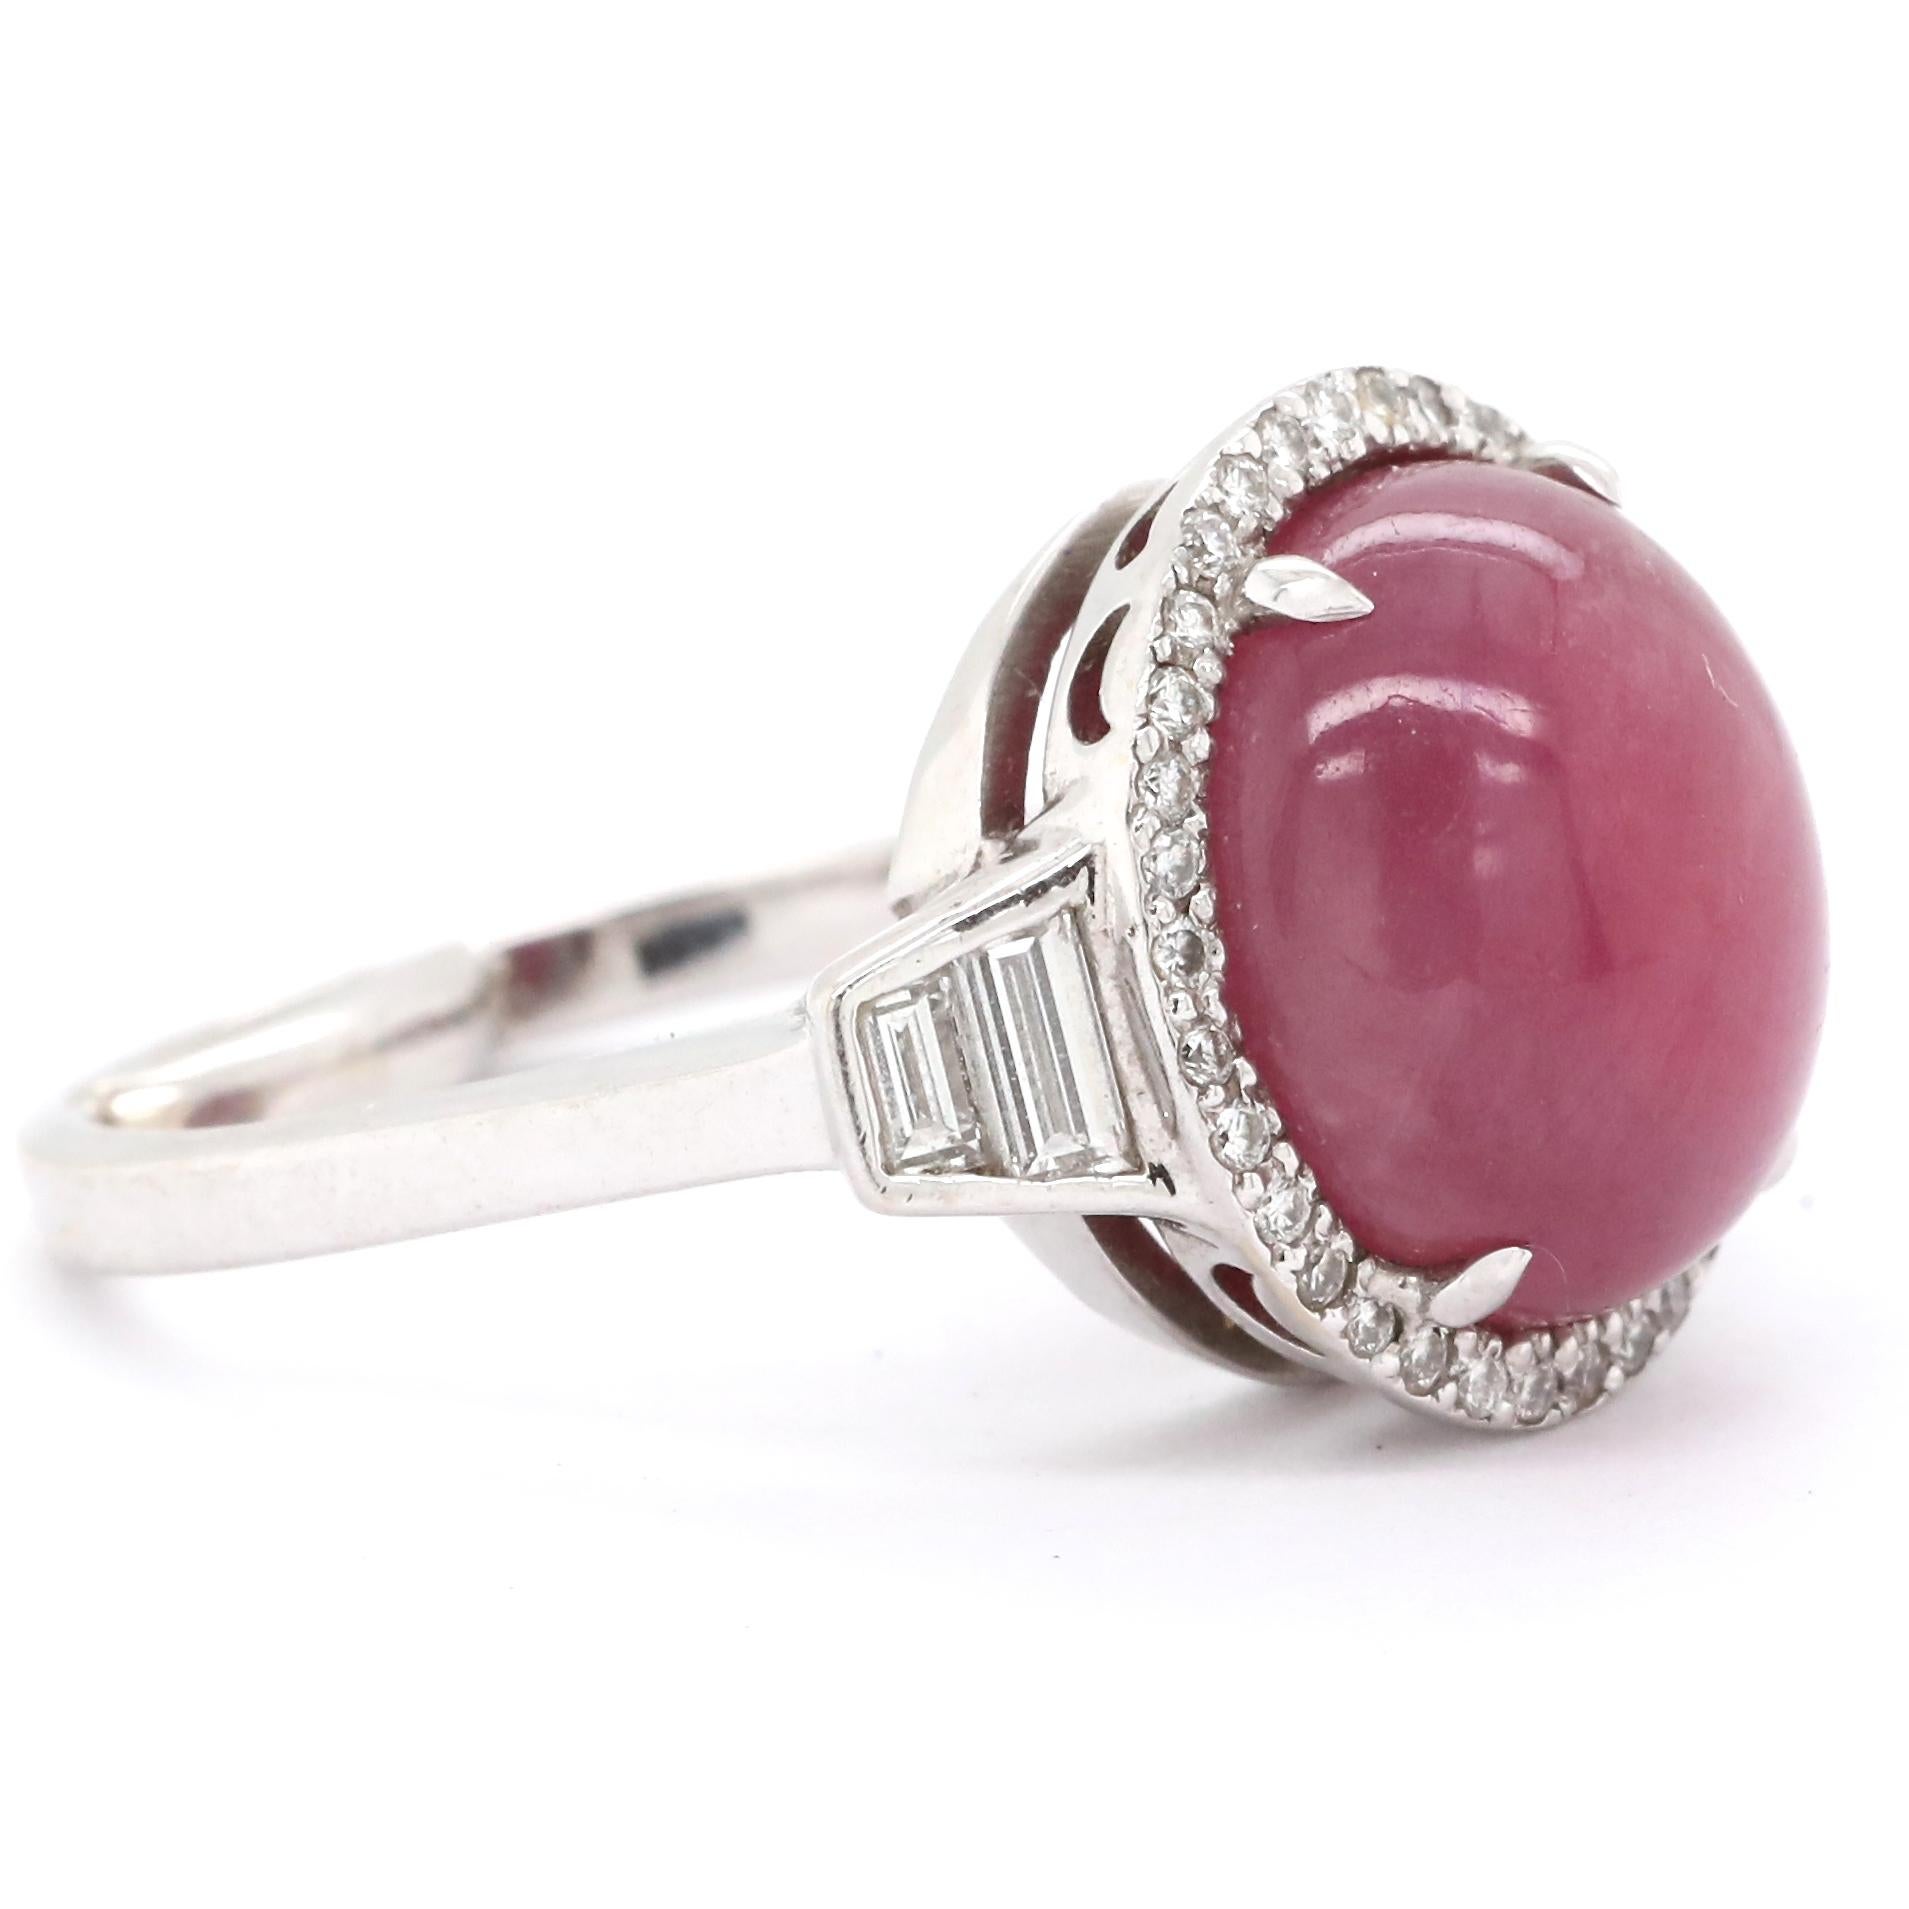 There is just something special about Cabochon cuts. They are unique, smooth and attractive. This is a Modern Ruby Diamond 18k Gold Ring. The Cabochon cut ruby is approximately 10.50 carat. Accompanied by 34 round brilliant cut diamonds and 4